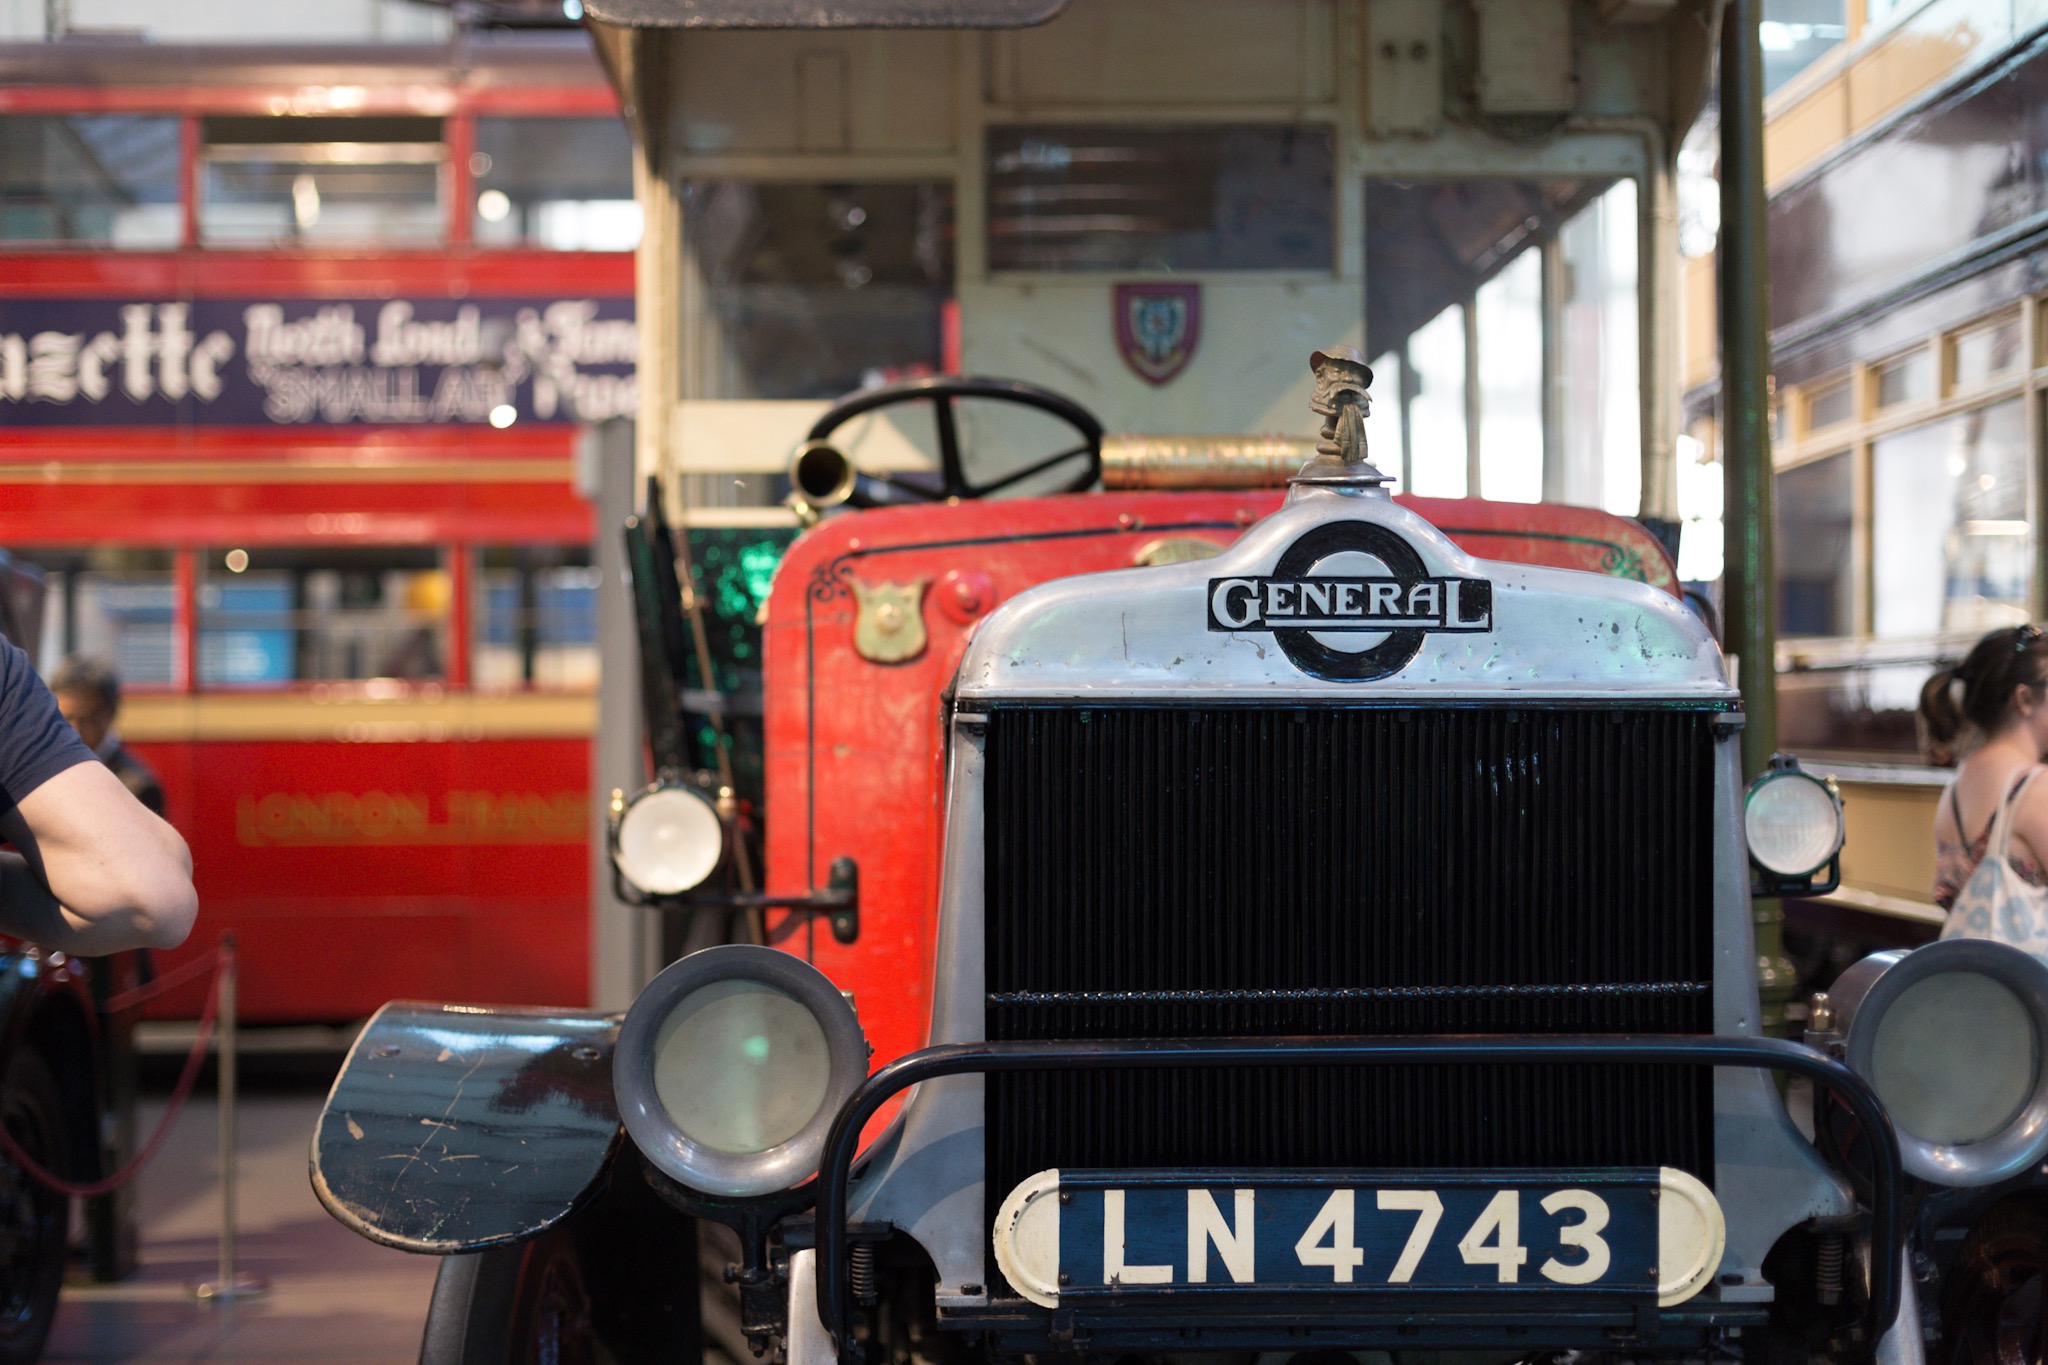 At the London Transport Museum.